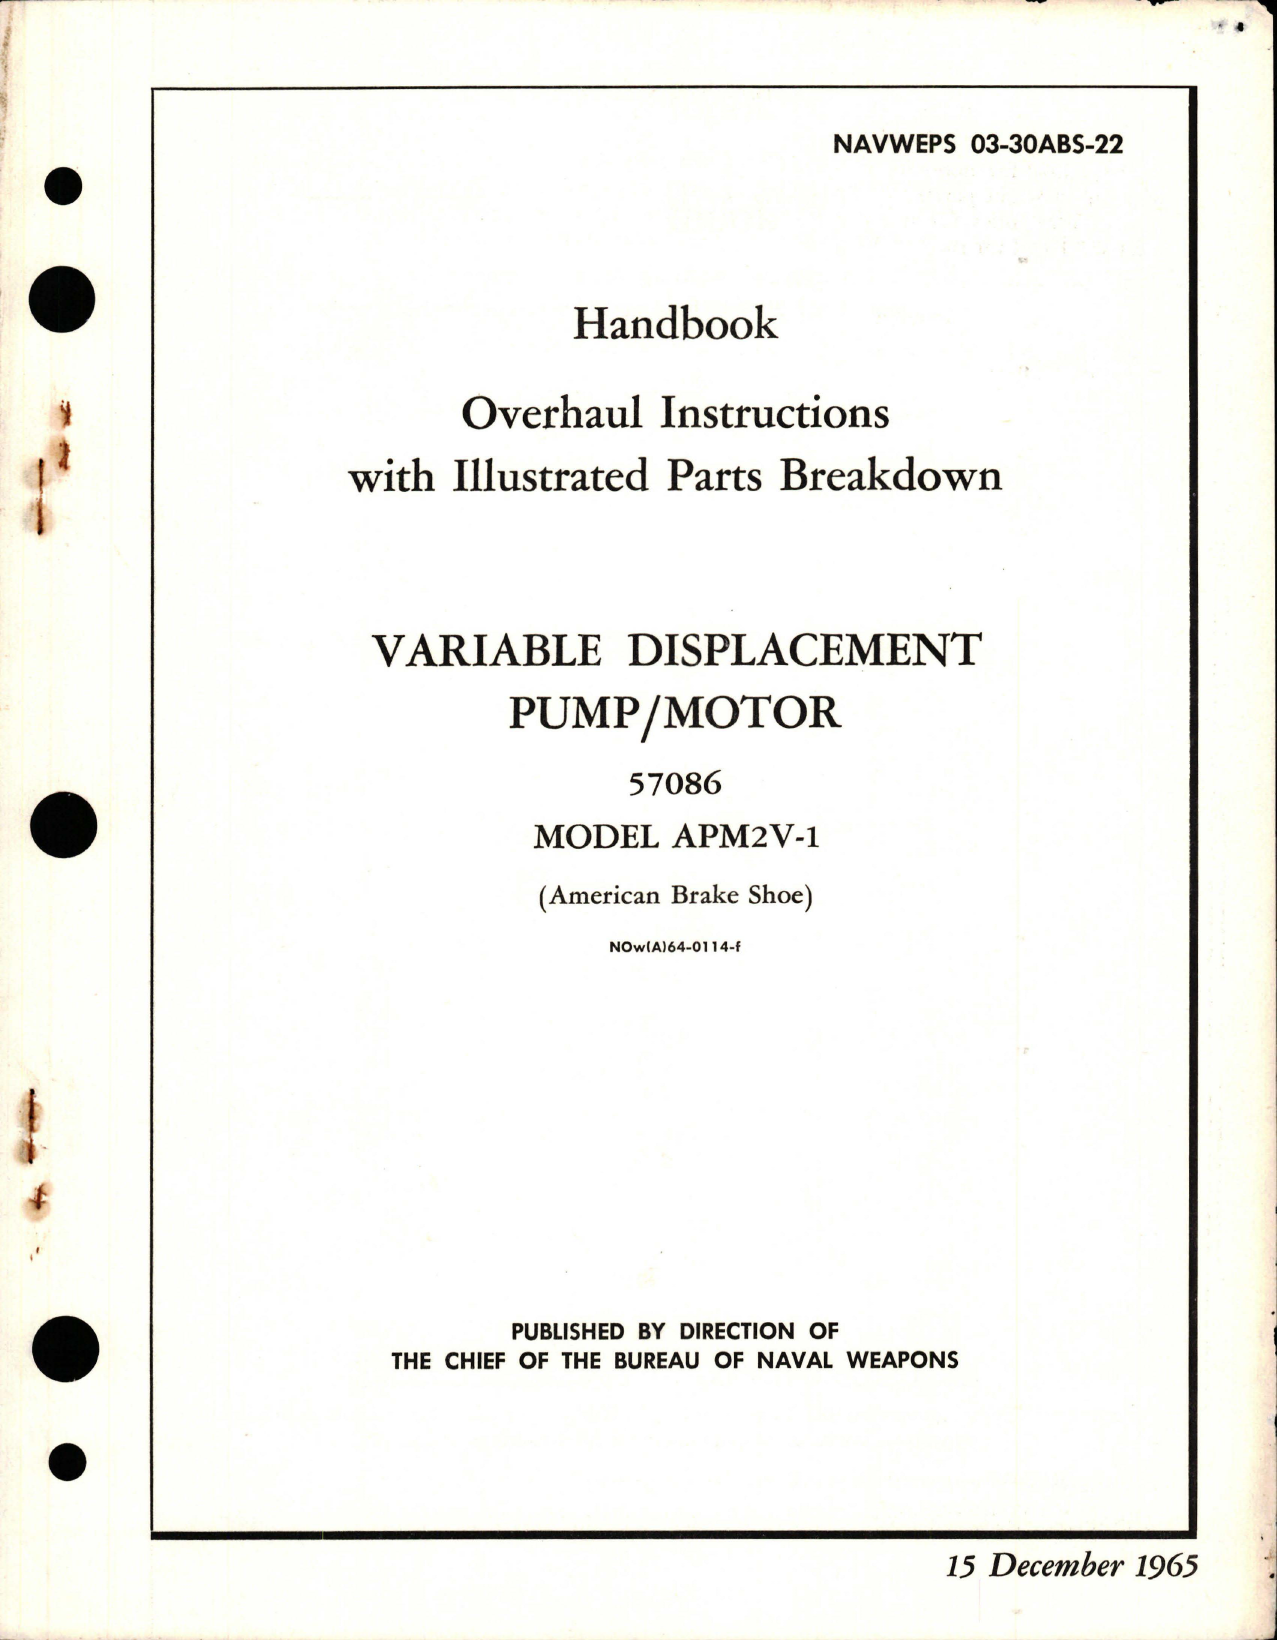 Sample page 1 from AirCorps Library document: Overhaul Instructions Breakdown with Illustrated Parts for Variable Displacement Pump-Motor - 57086 - Model APM2V-1